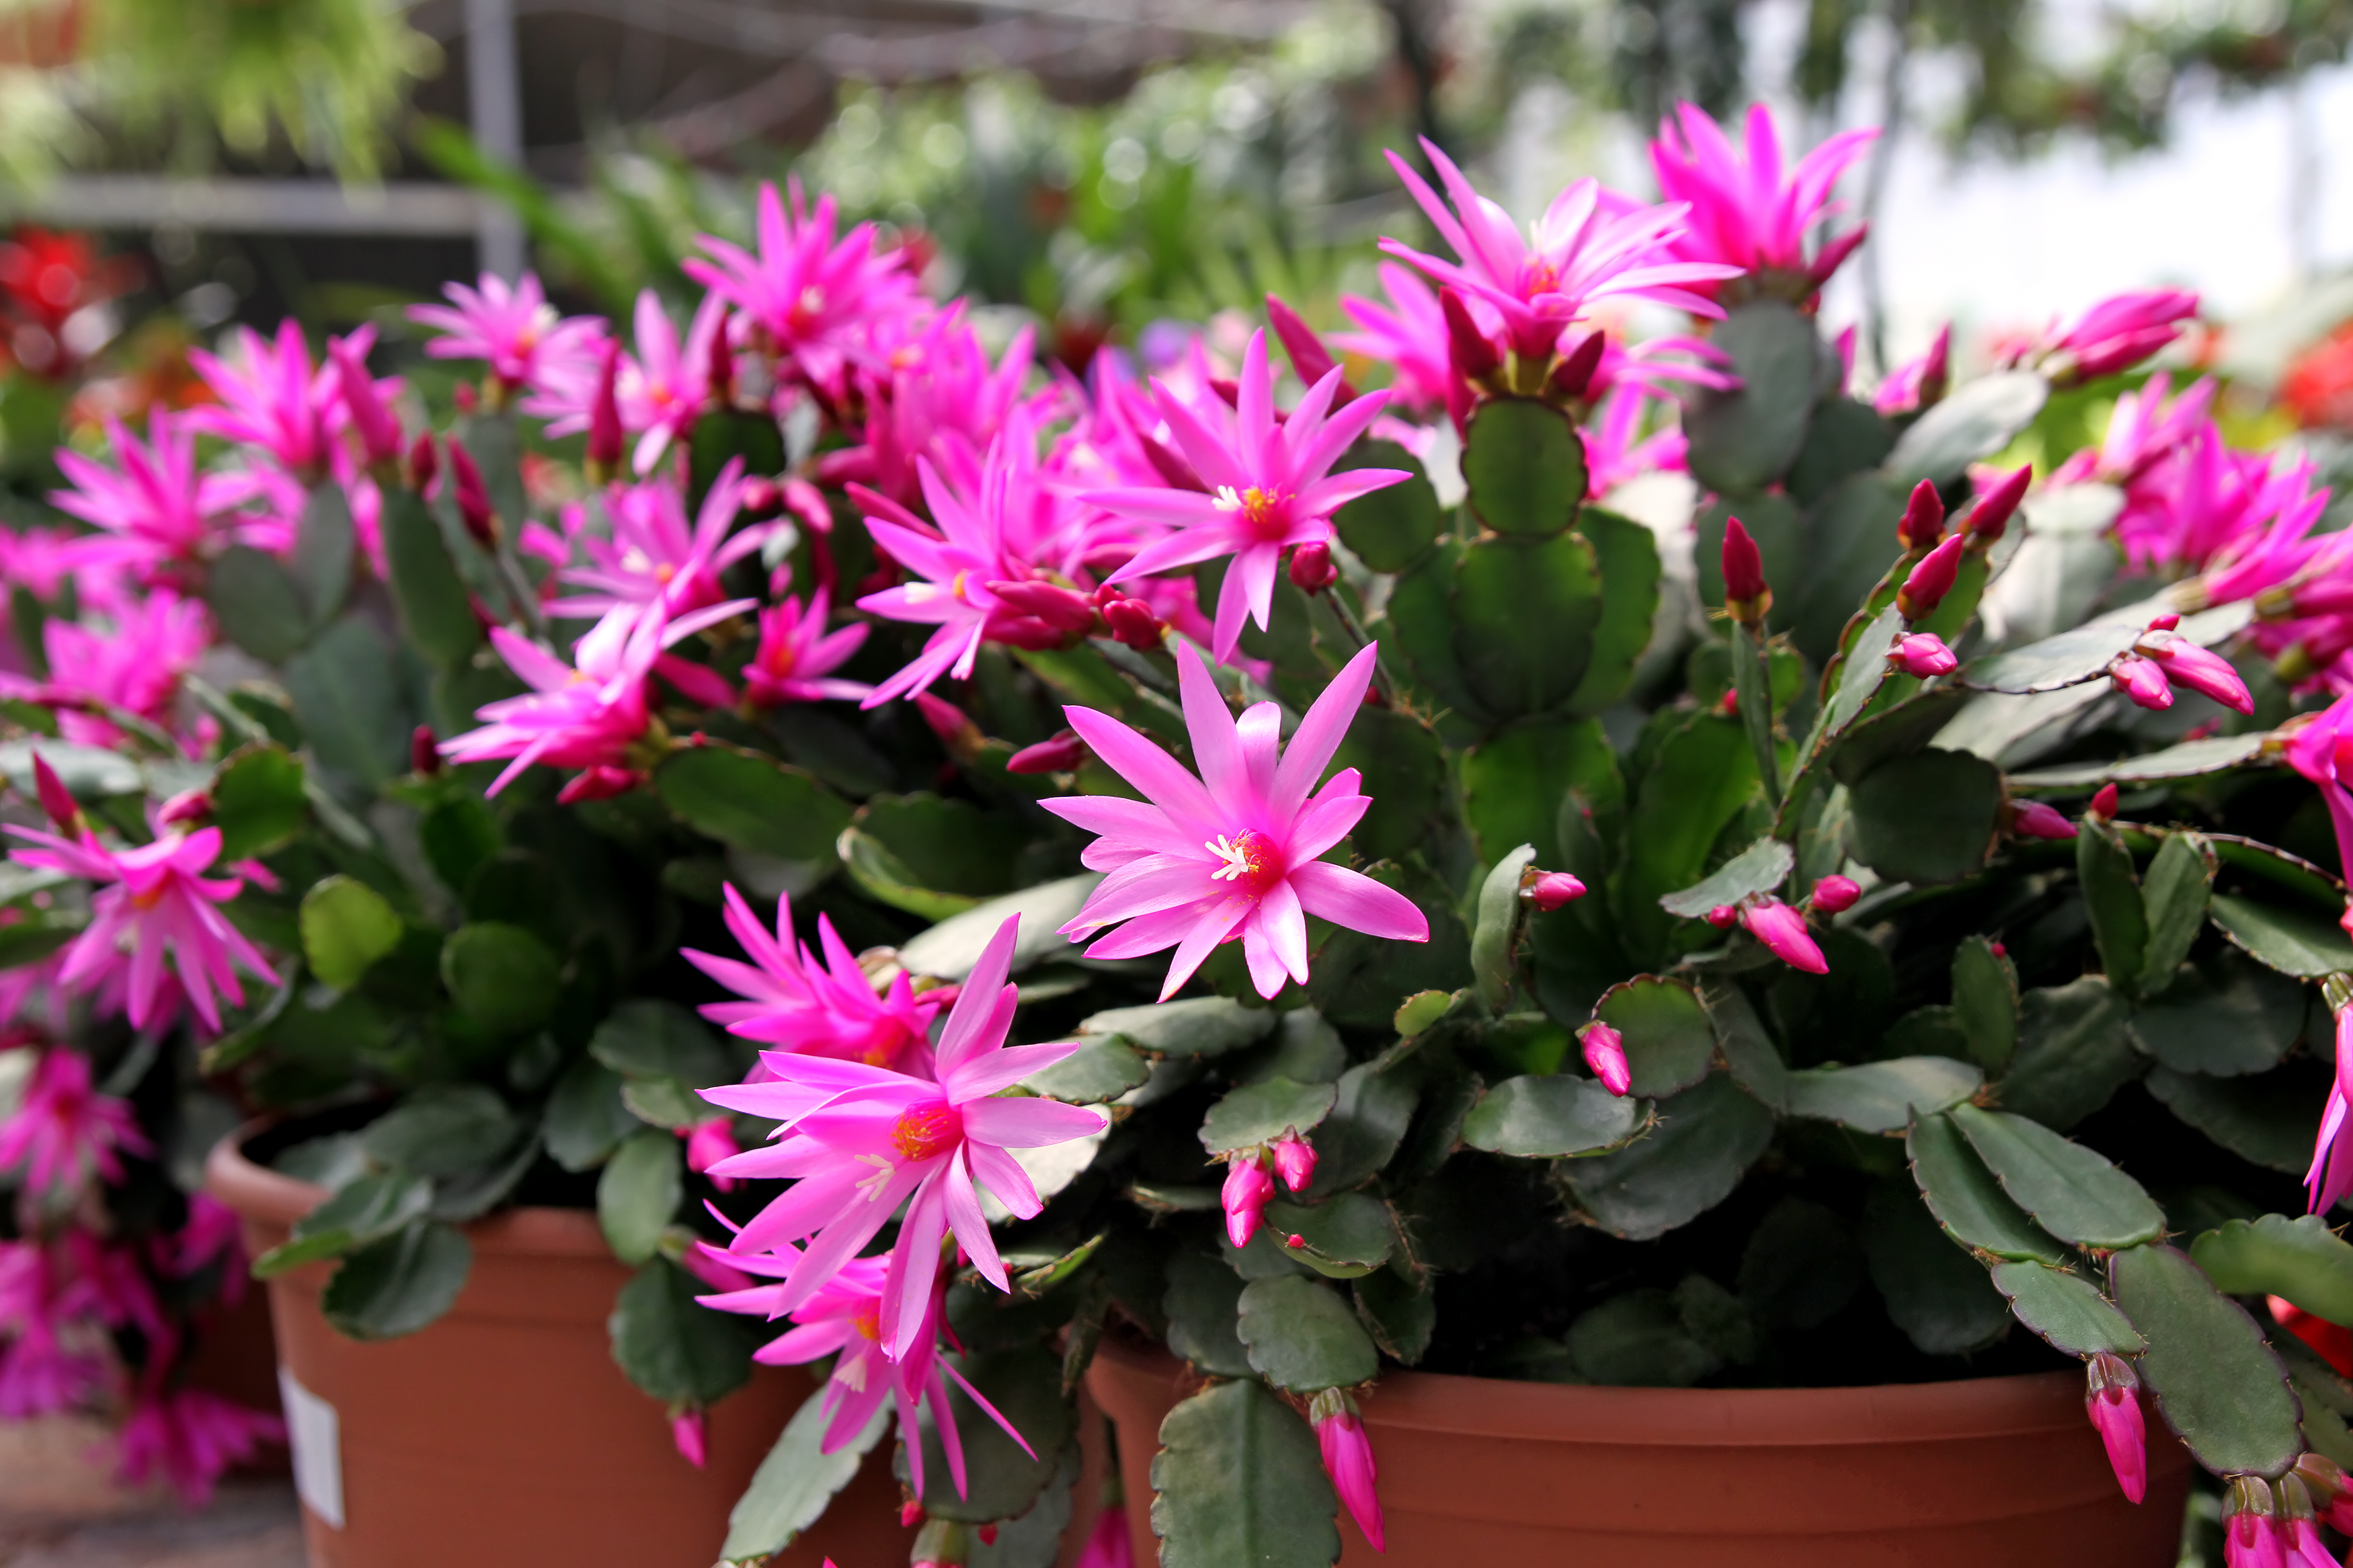 The Easter cactus